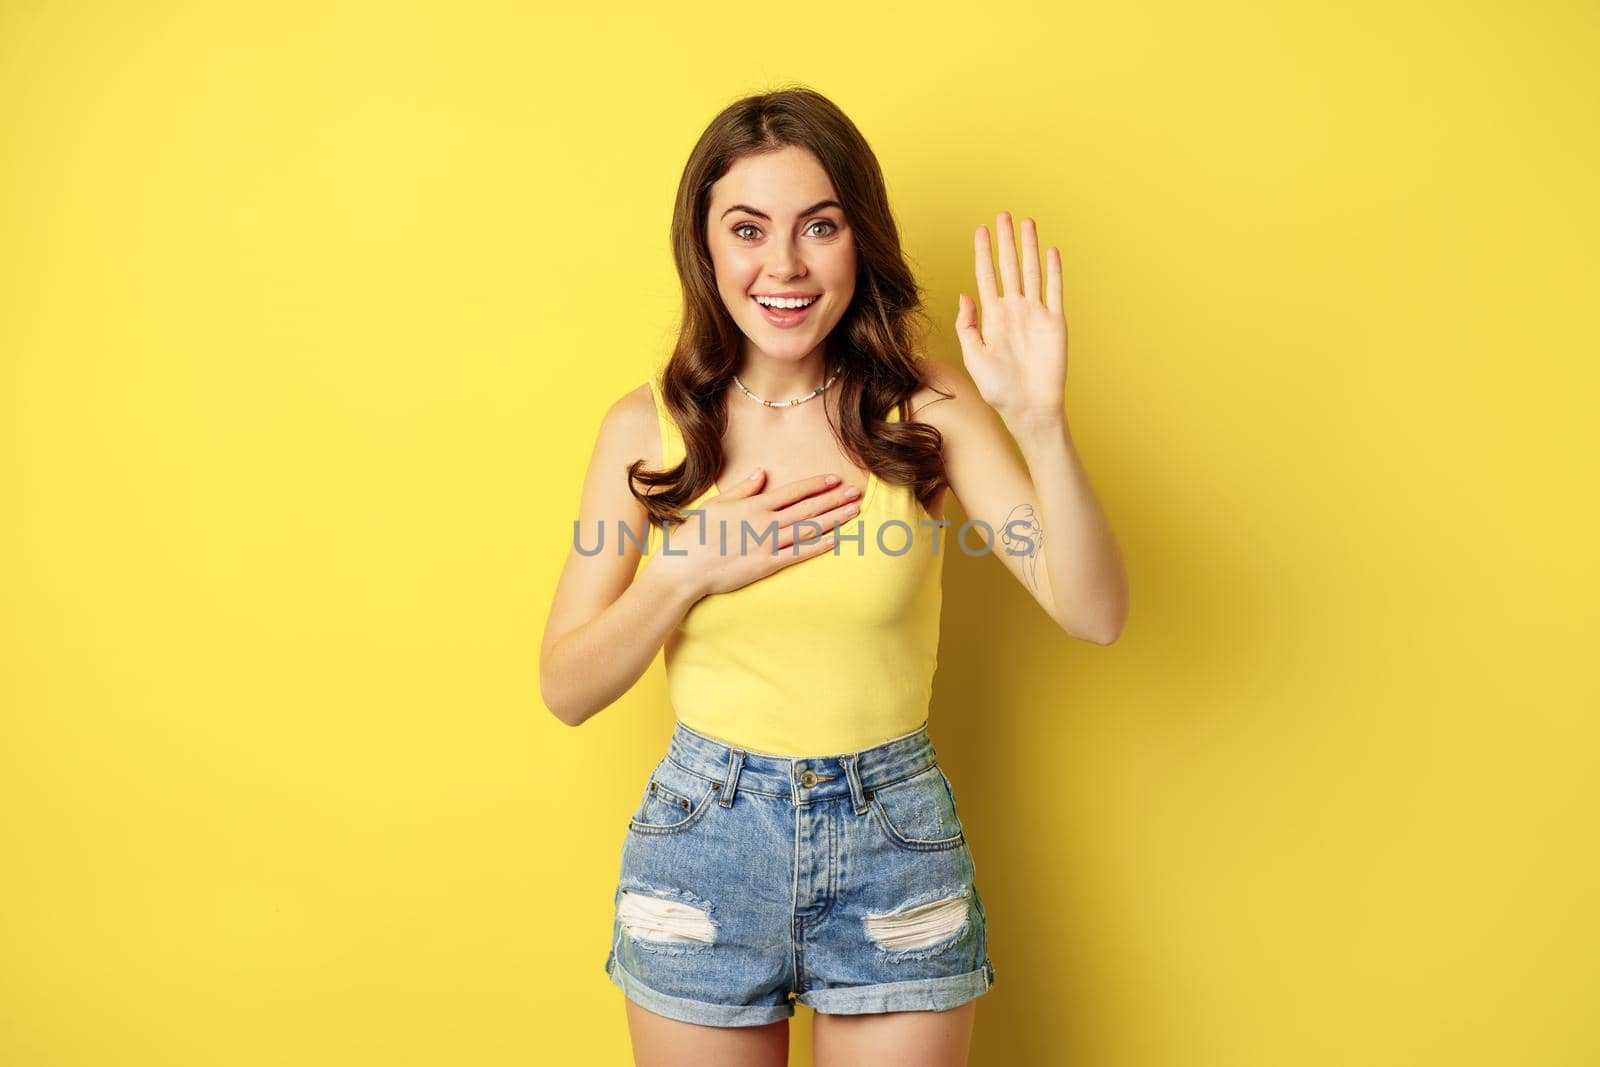 Enthusiastic girl raising hand, promise, introduce herself, say her name, standing over yellow background, smiling and looking excited by Benzoix